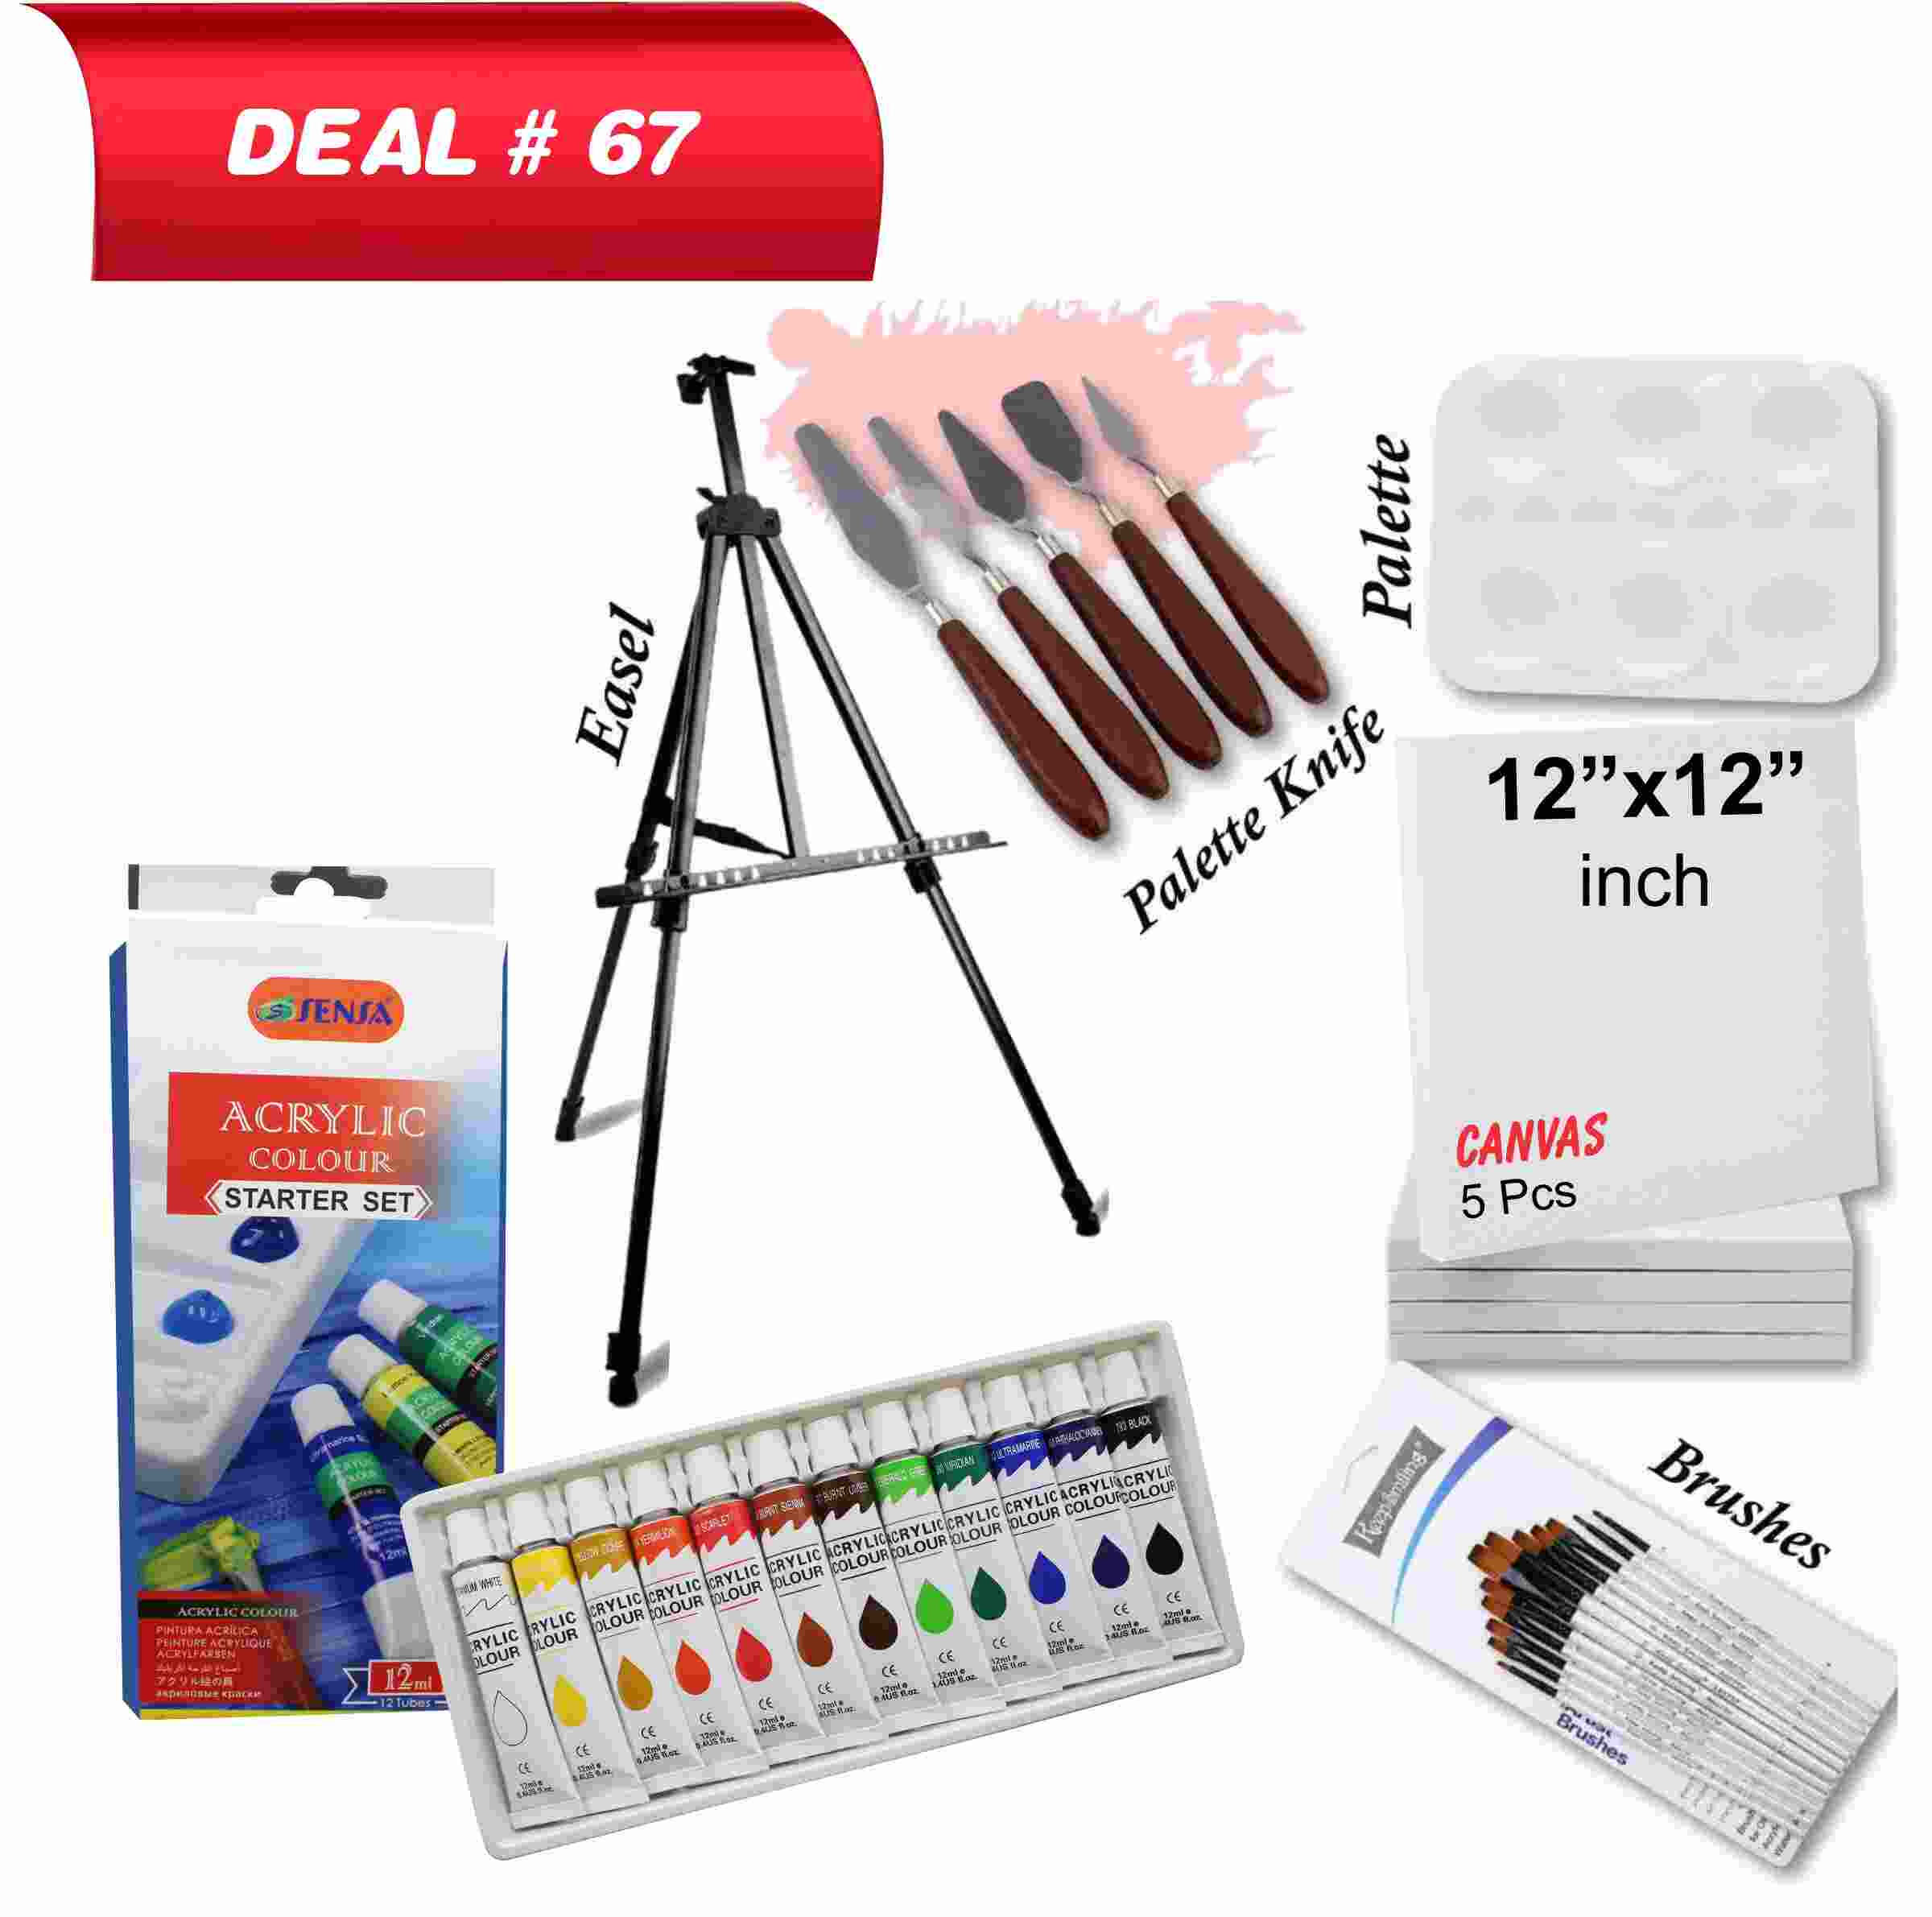 Acrylic Painting Deal with Easel, Deal No.67